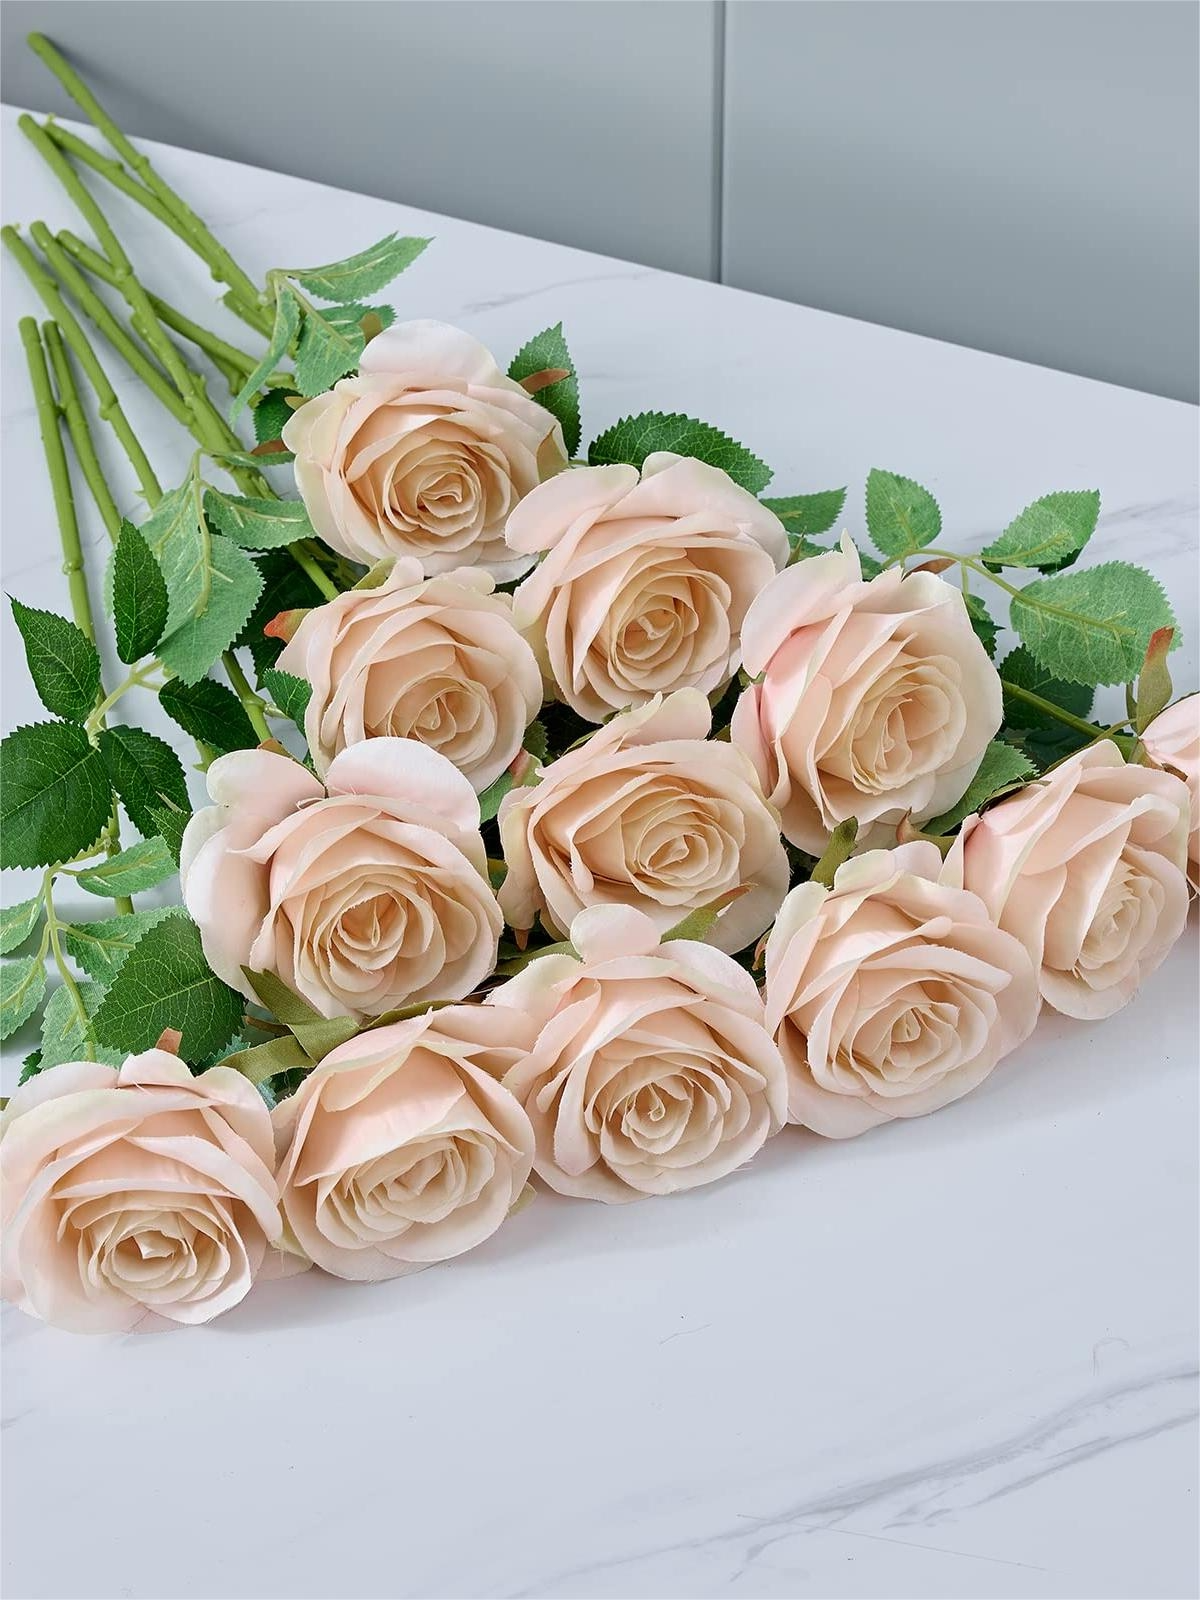 Nude Artificial Rose Flowers With Long Stems Wedding Bouquet Centerpieces Decorations HH8028